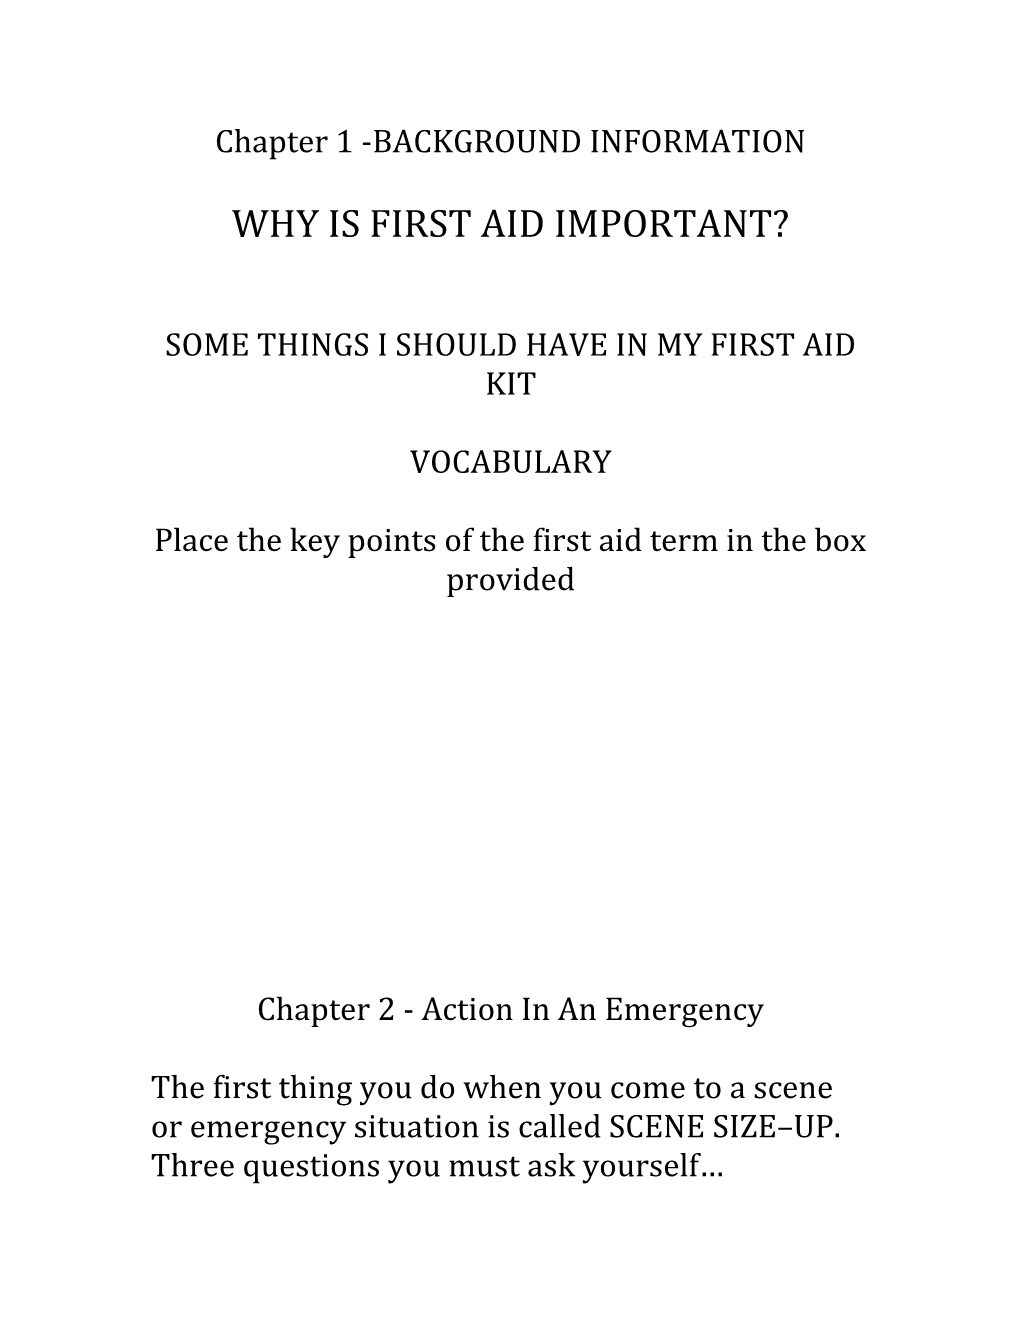 Why Is First Aid Important?